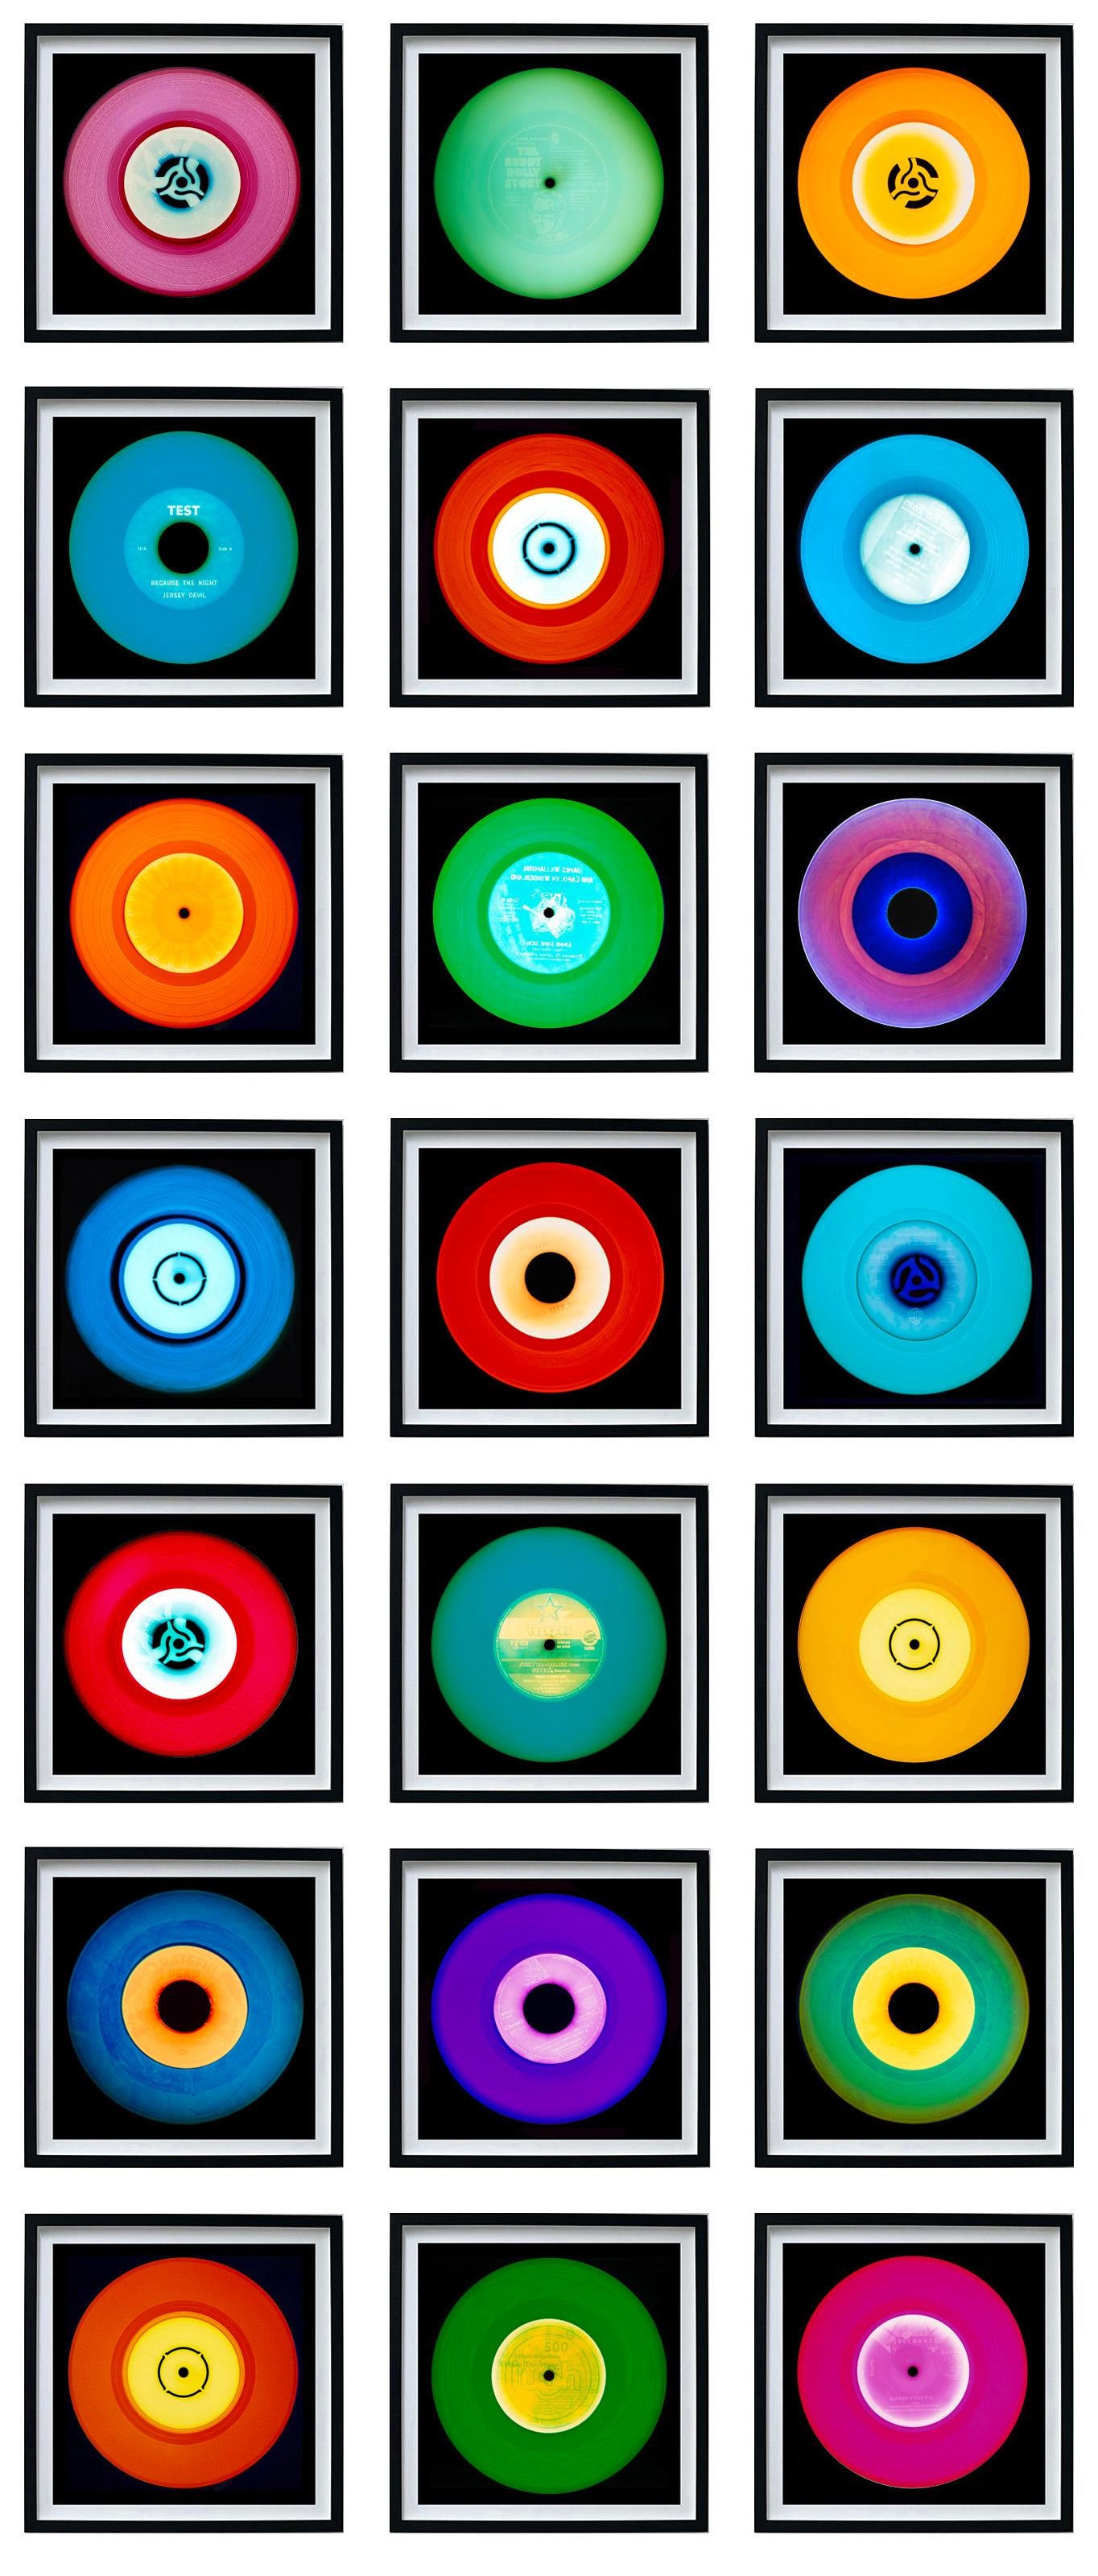 Heidler & Heeps Vinyl Collection Twenty-One Piece Multi-color Installation.
Acclaimed contemporary photographers, Richard Heeps and Natasha Heidler have collaborated to make this beautifully mesmerising collection. A celebration of the vinyl record